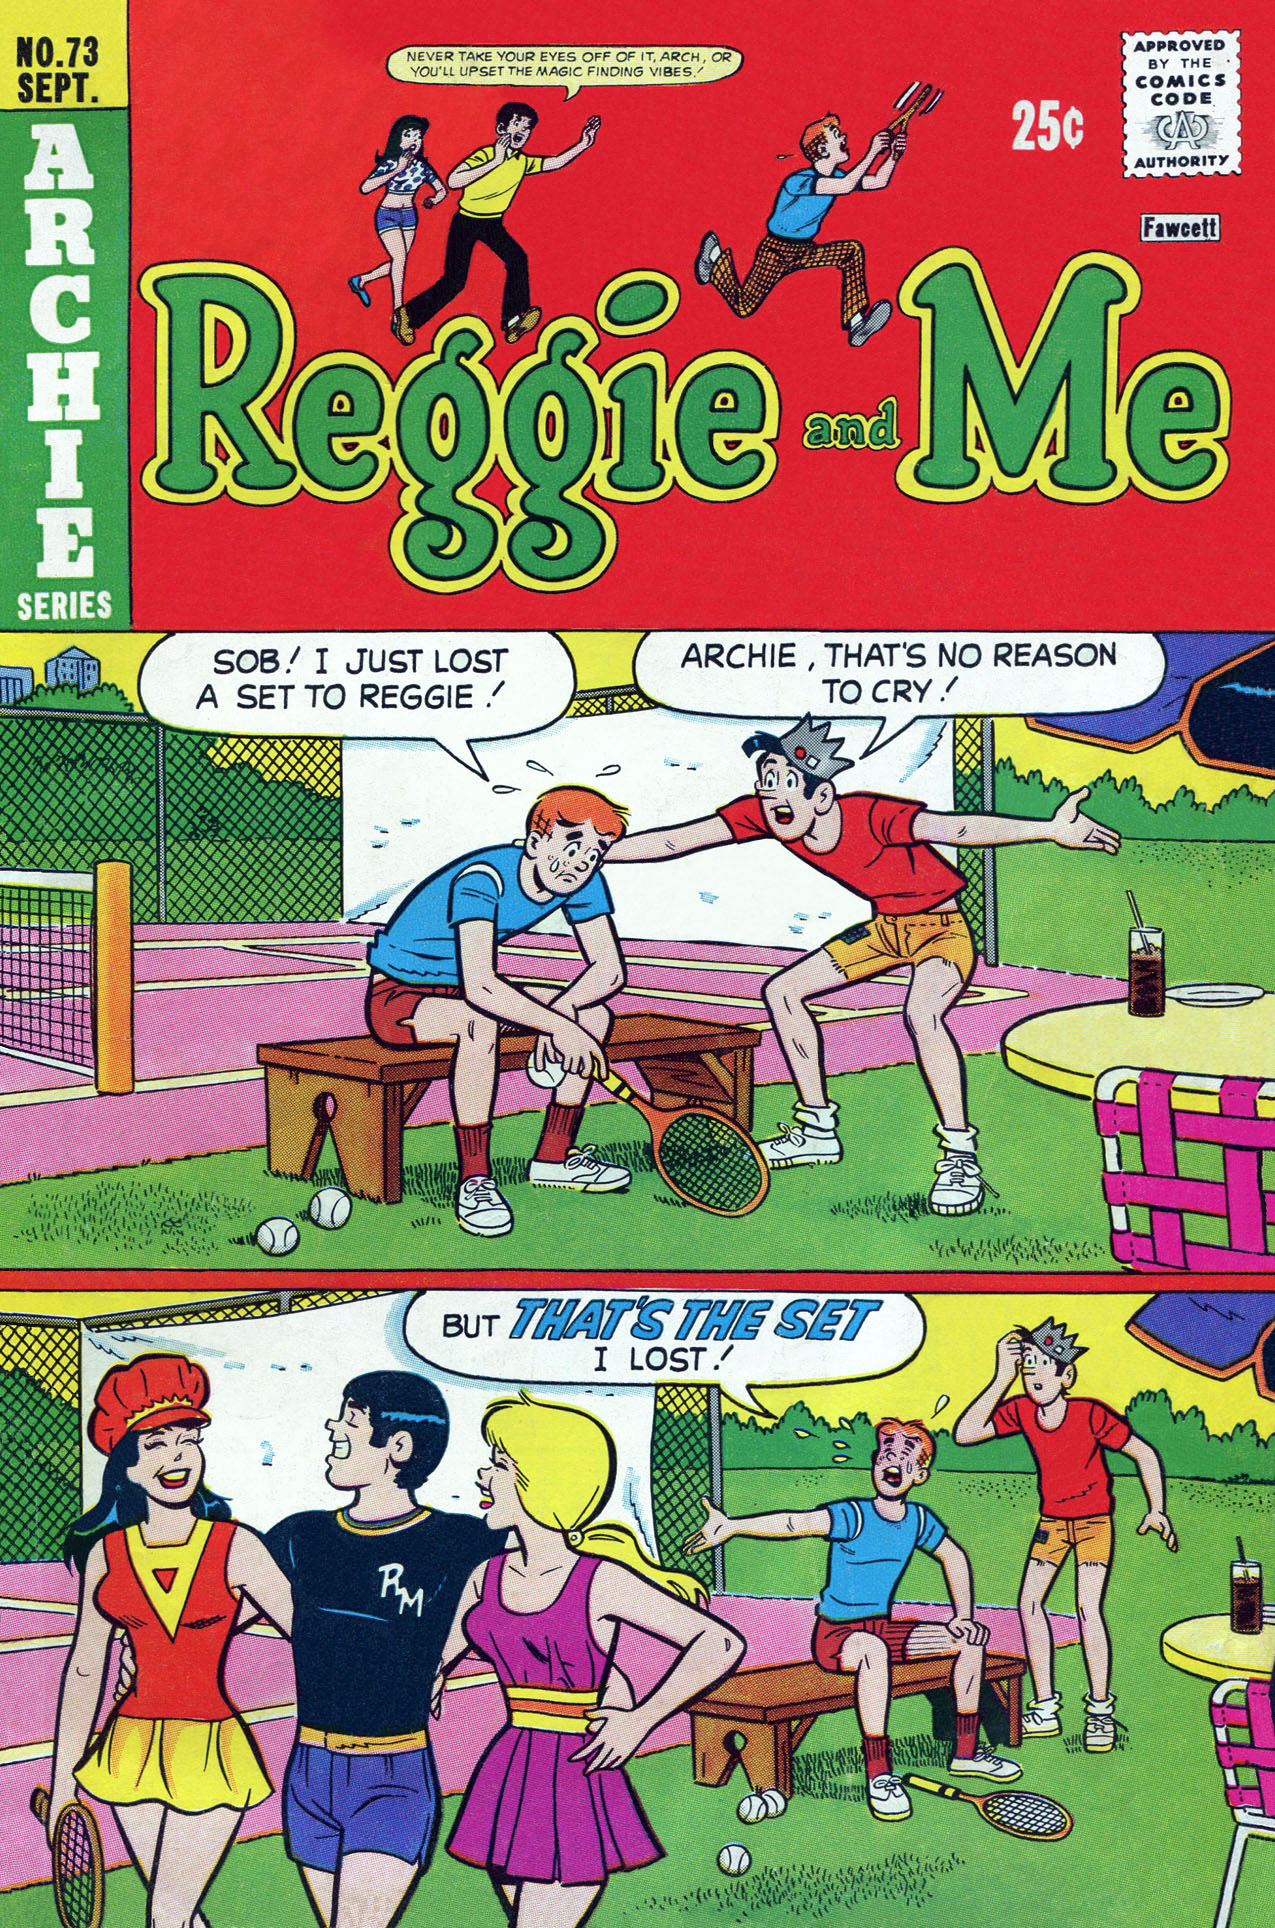 Read online Reggie and Me (1966) comic -  Issue #73 - 1